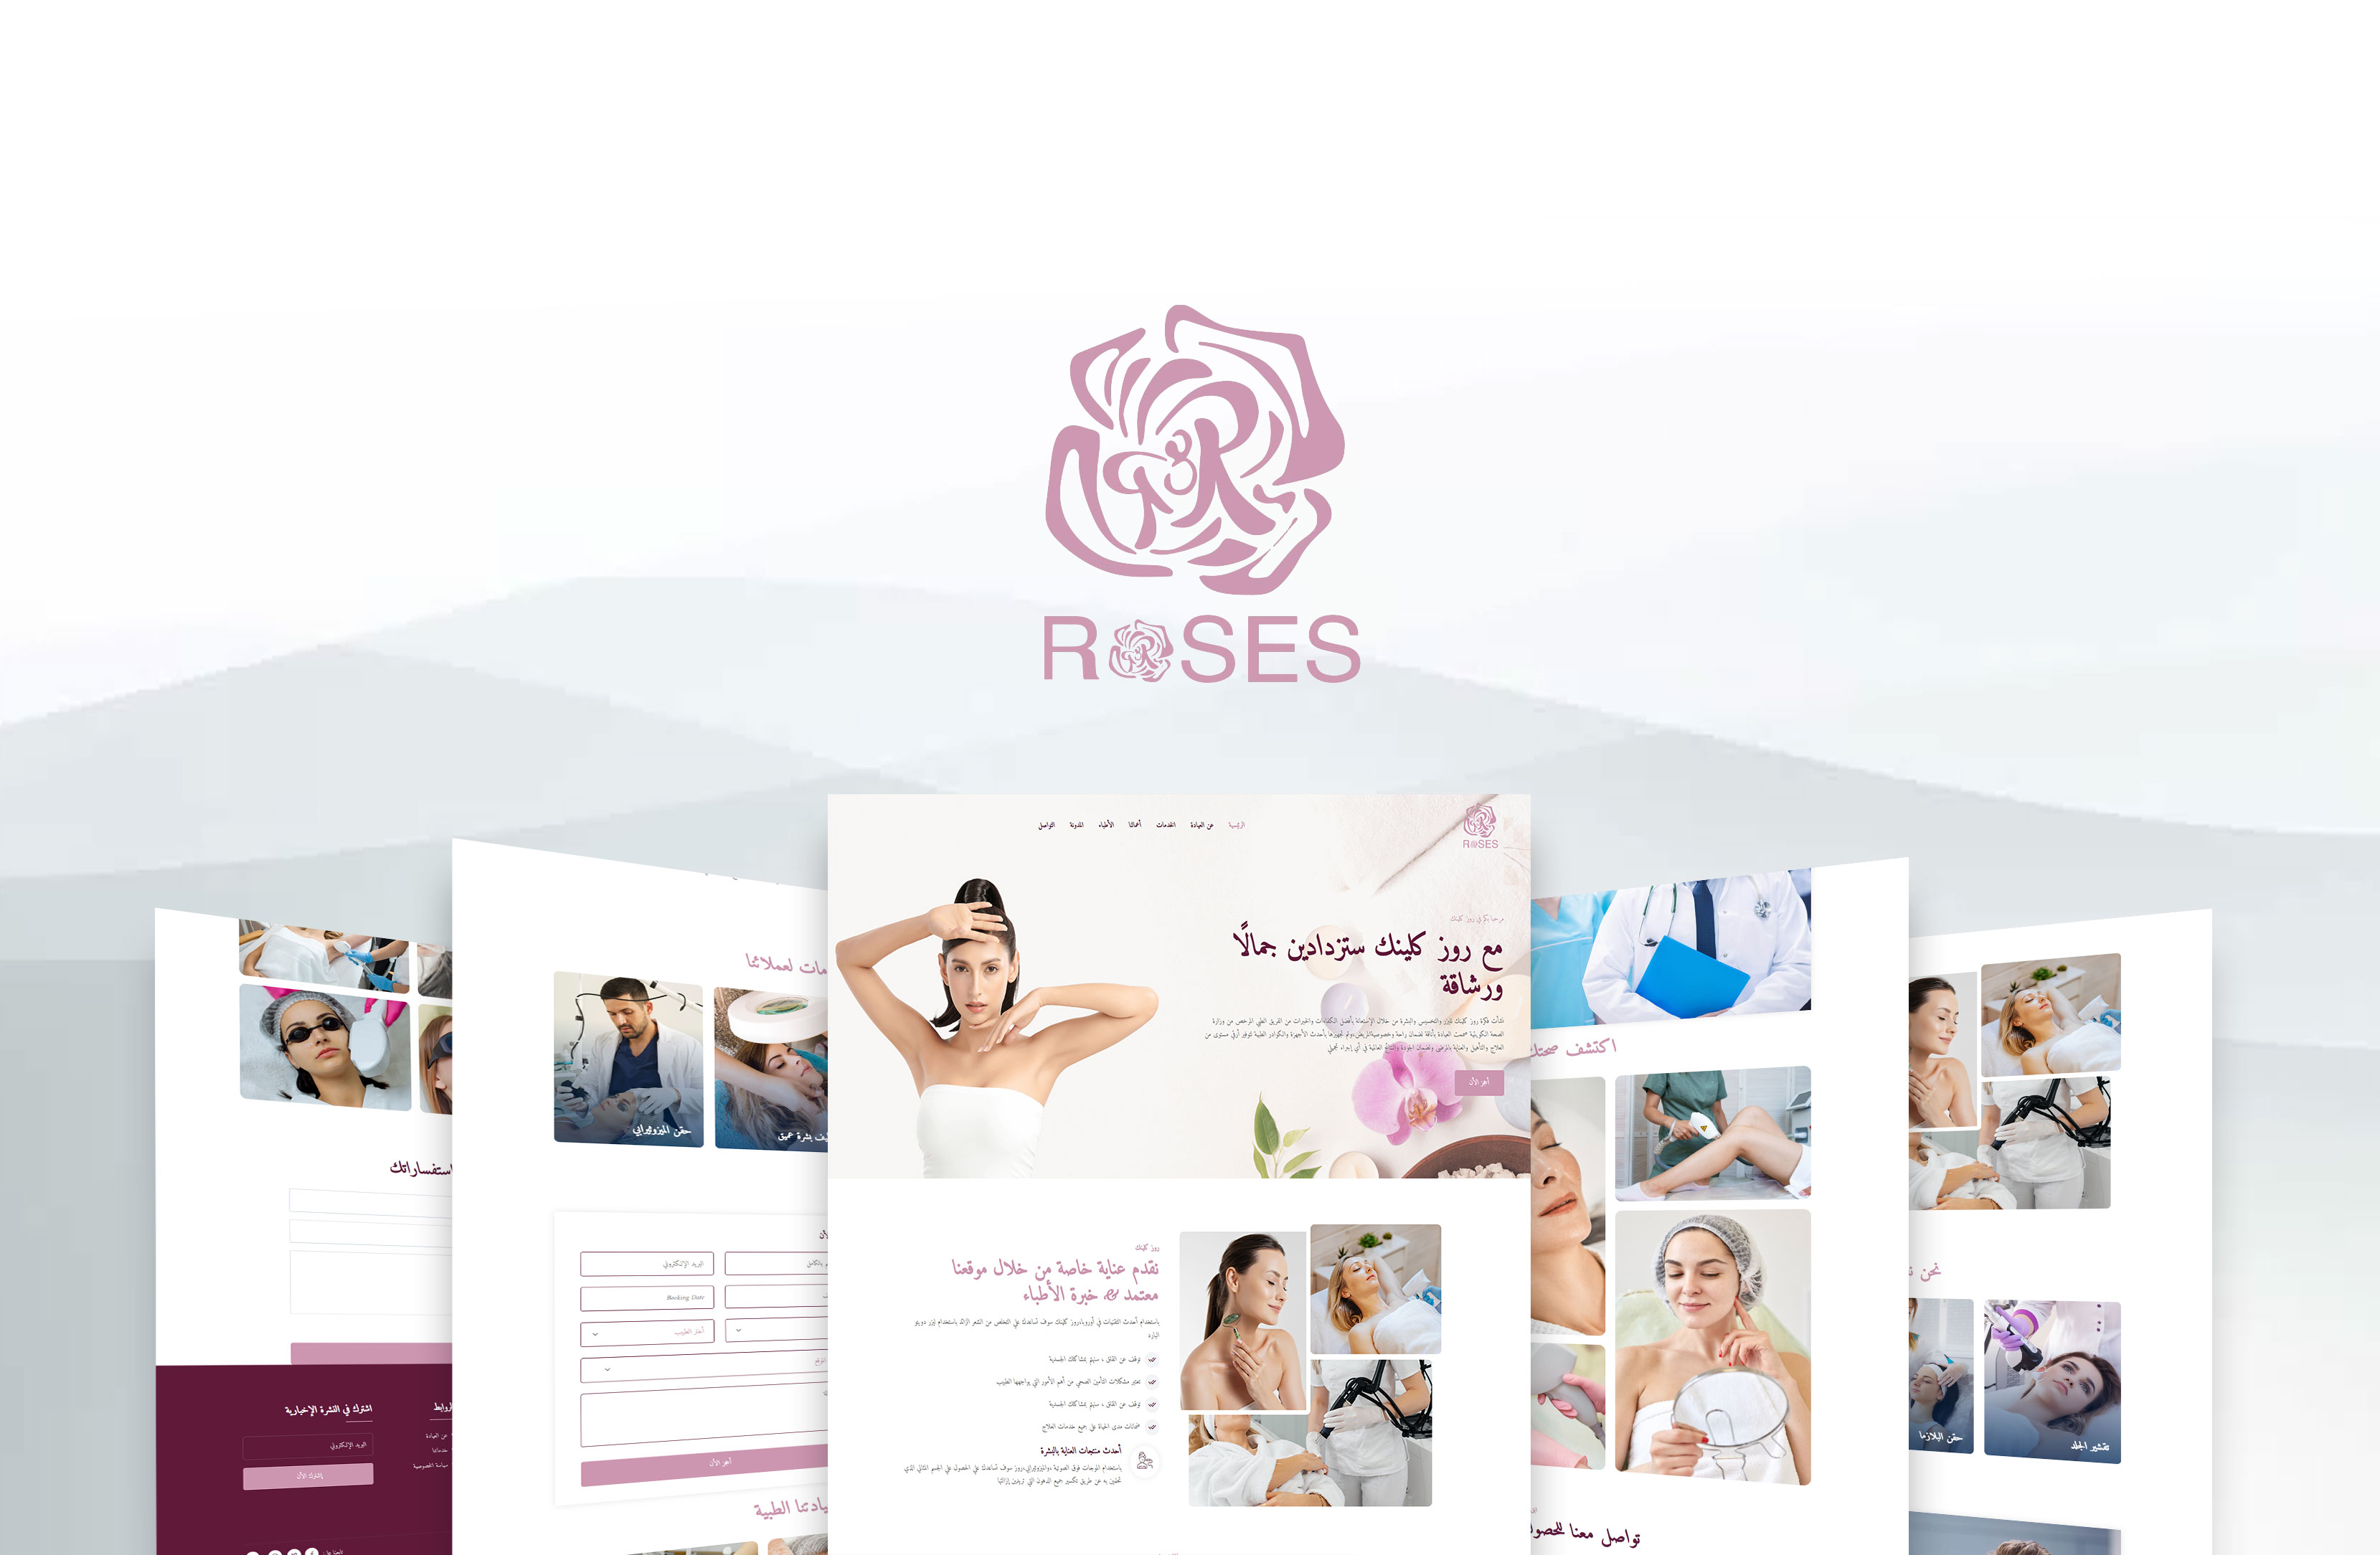 Roses Clinic Website